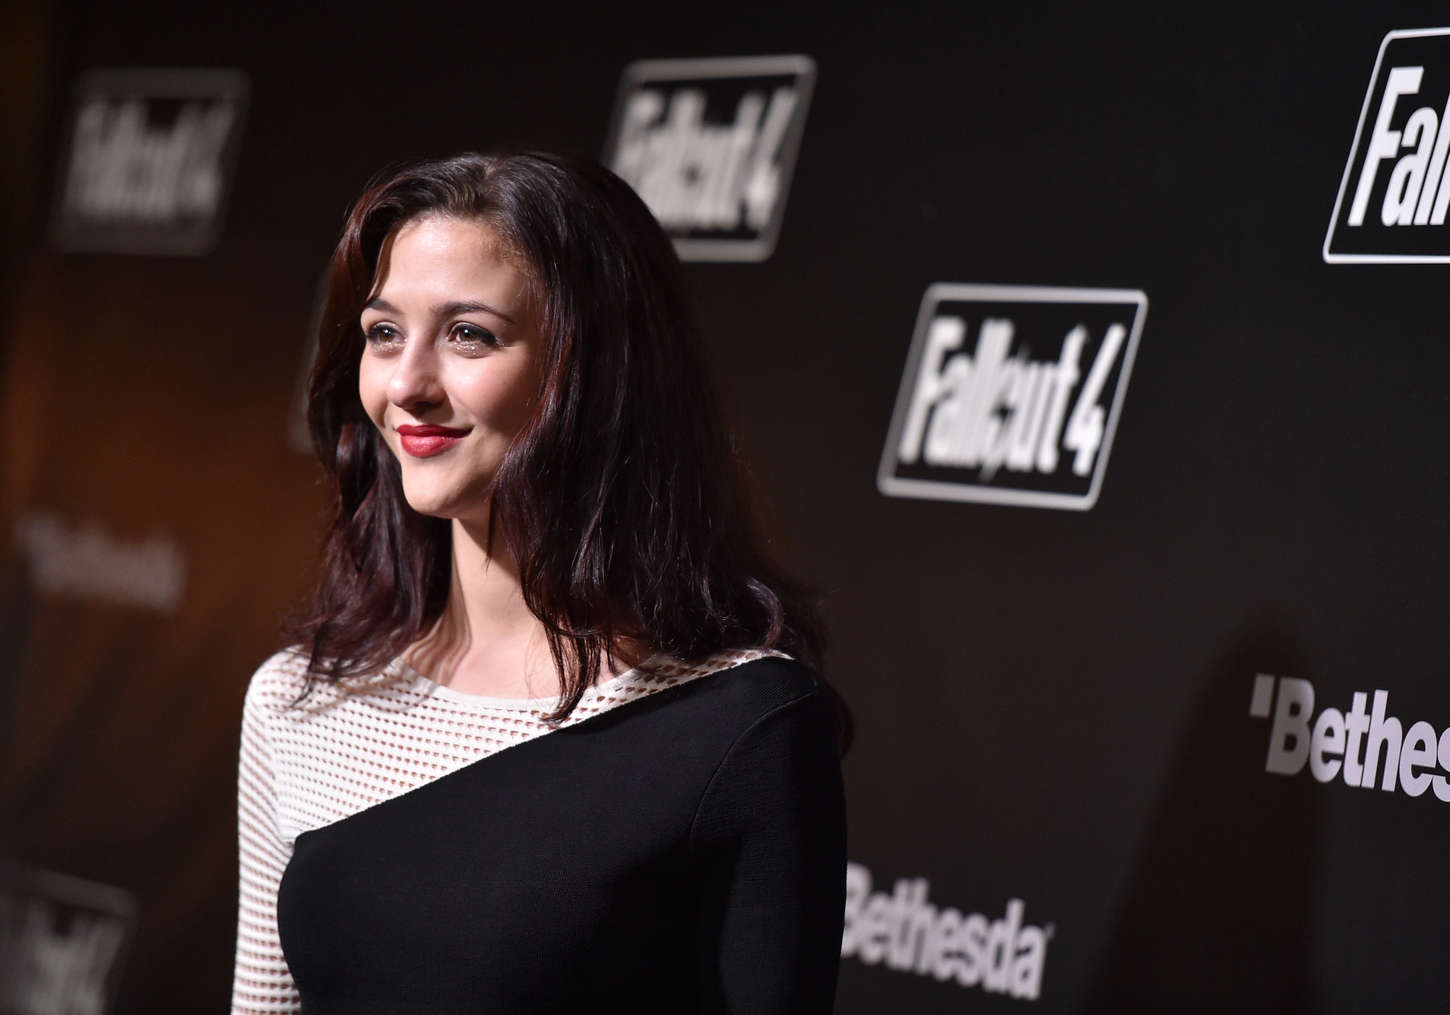 Katie Findlay 2015 : Katie Findlay: Fallout 4 Video Game Launch Event -02. 